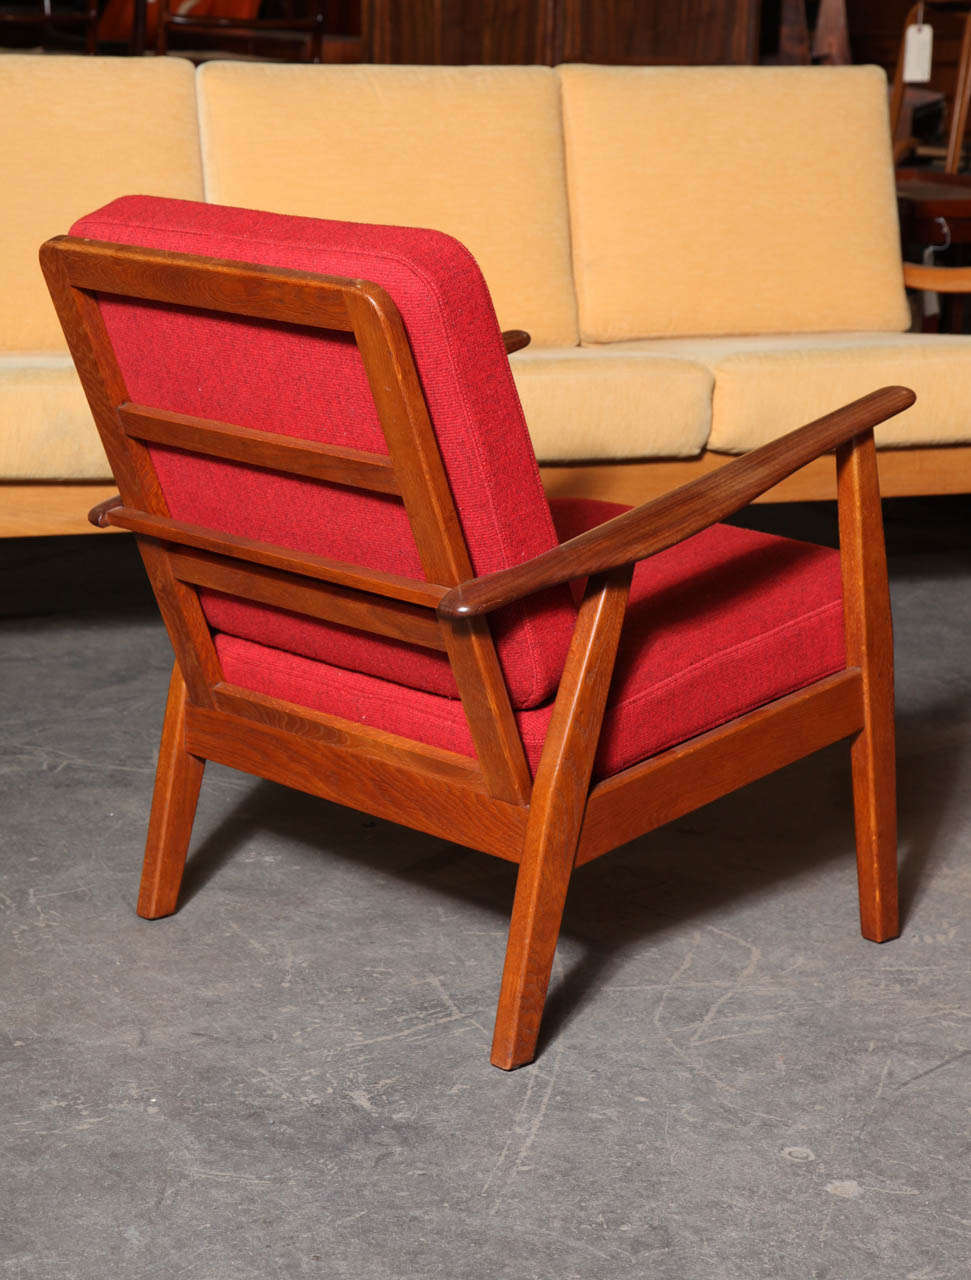 Pair of Teak and Red Danish Modern Lounge Chairs 1